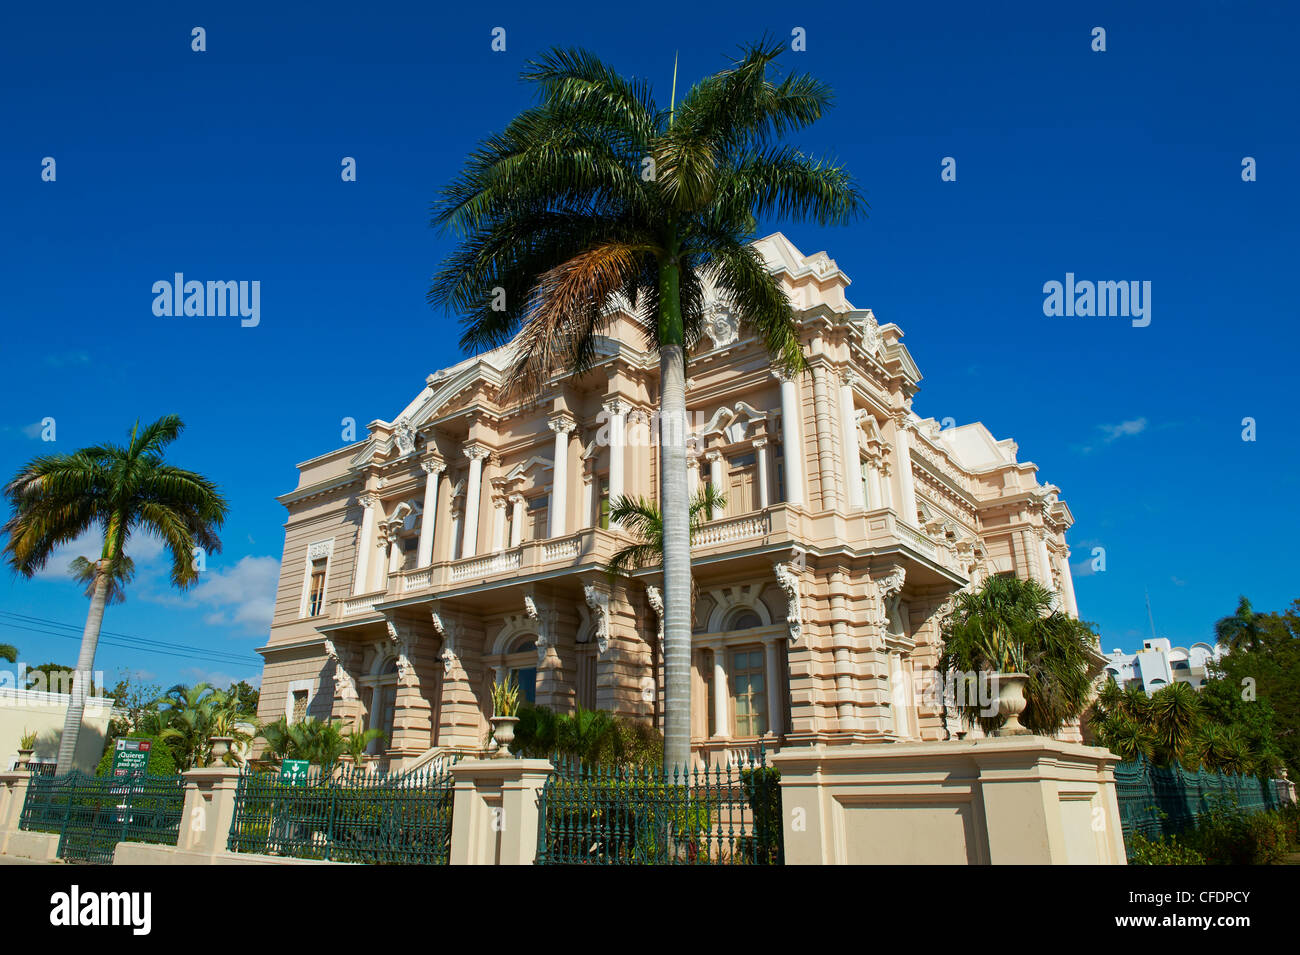 Regional Museum of Anthropology, housed in a 19th century building, Paseo de Montejo, Merida, Yucatan State, Mexico Stock Photo